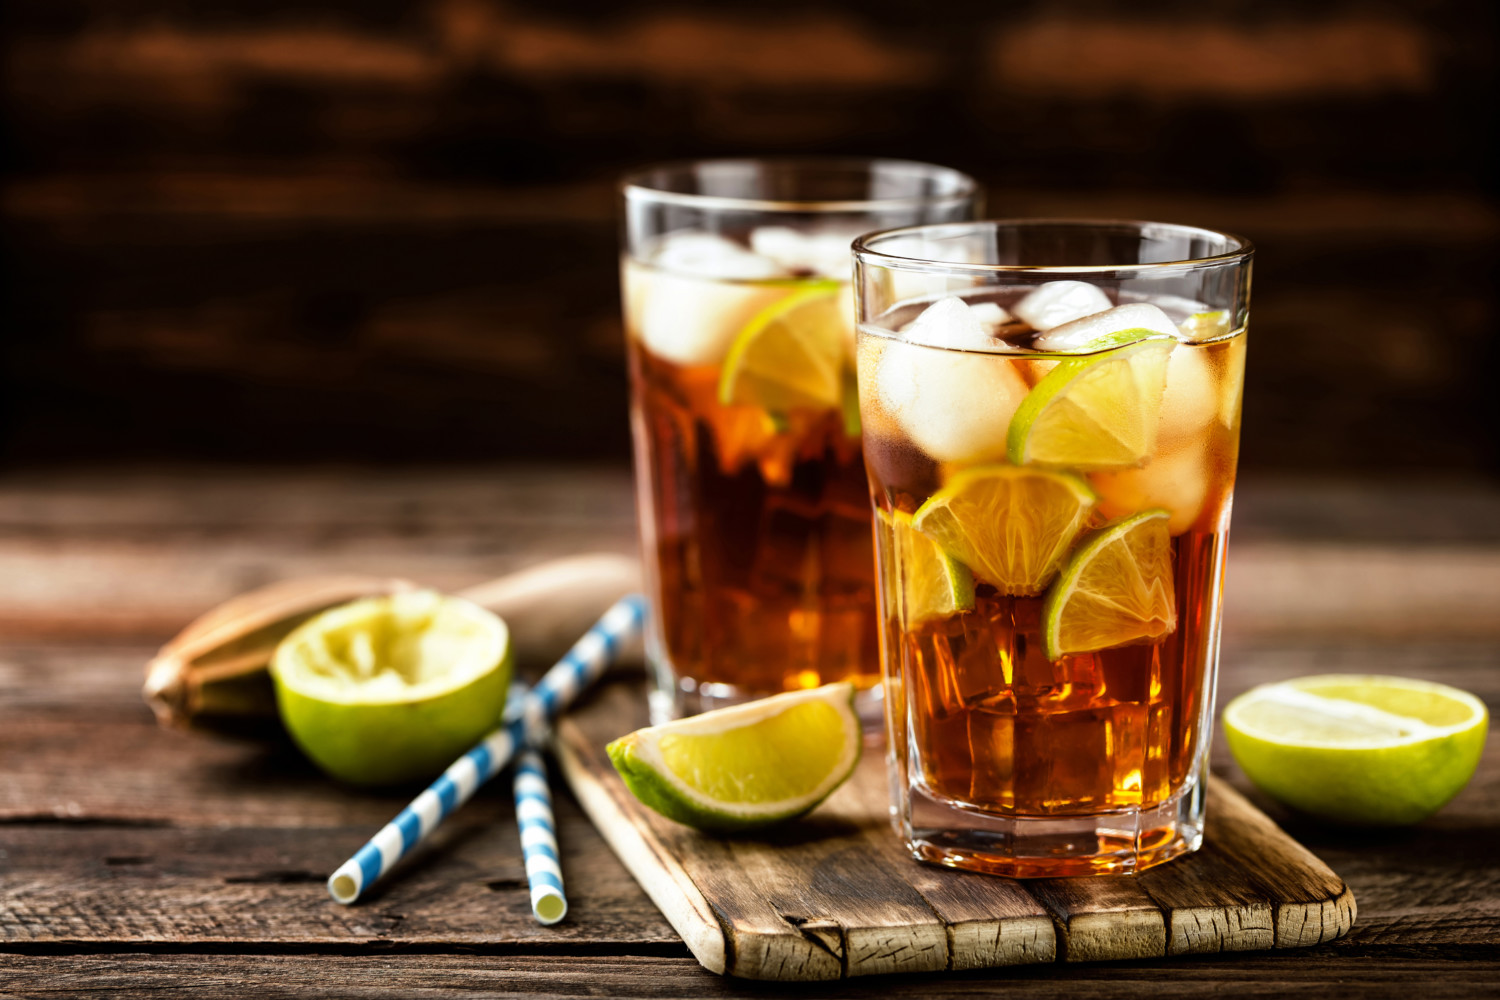 Long Island iced tea - one of the most popular cocktails in the world